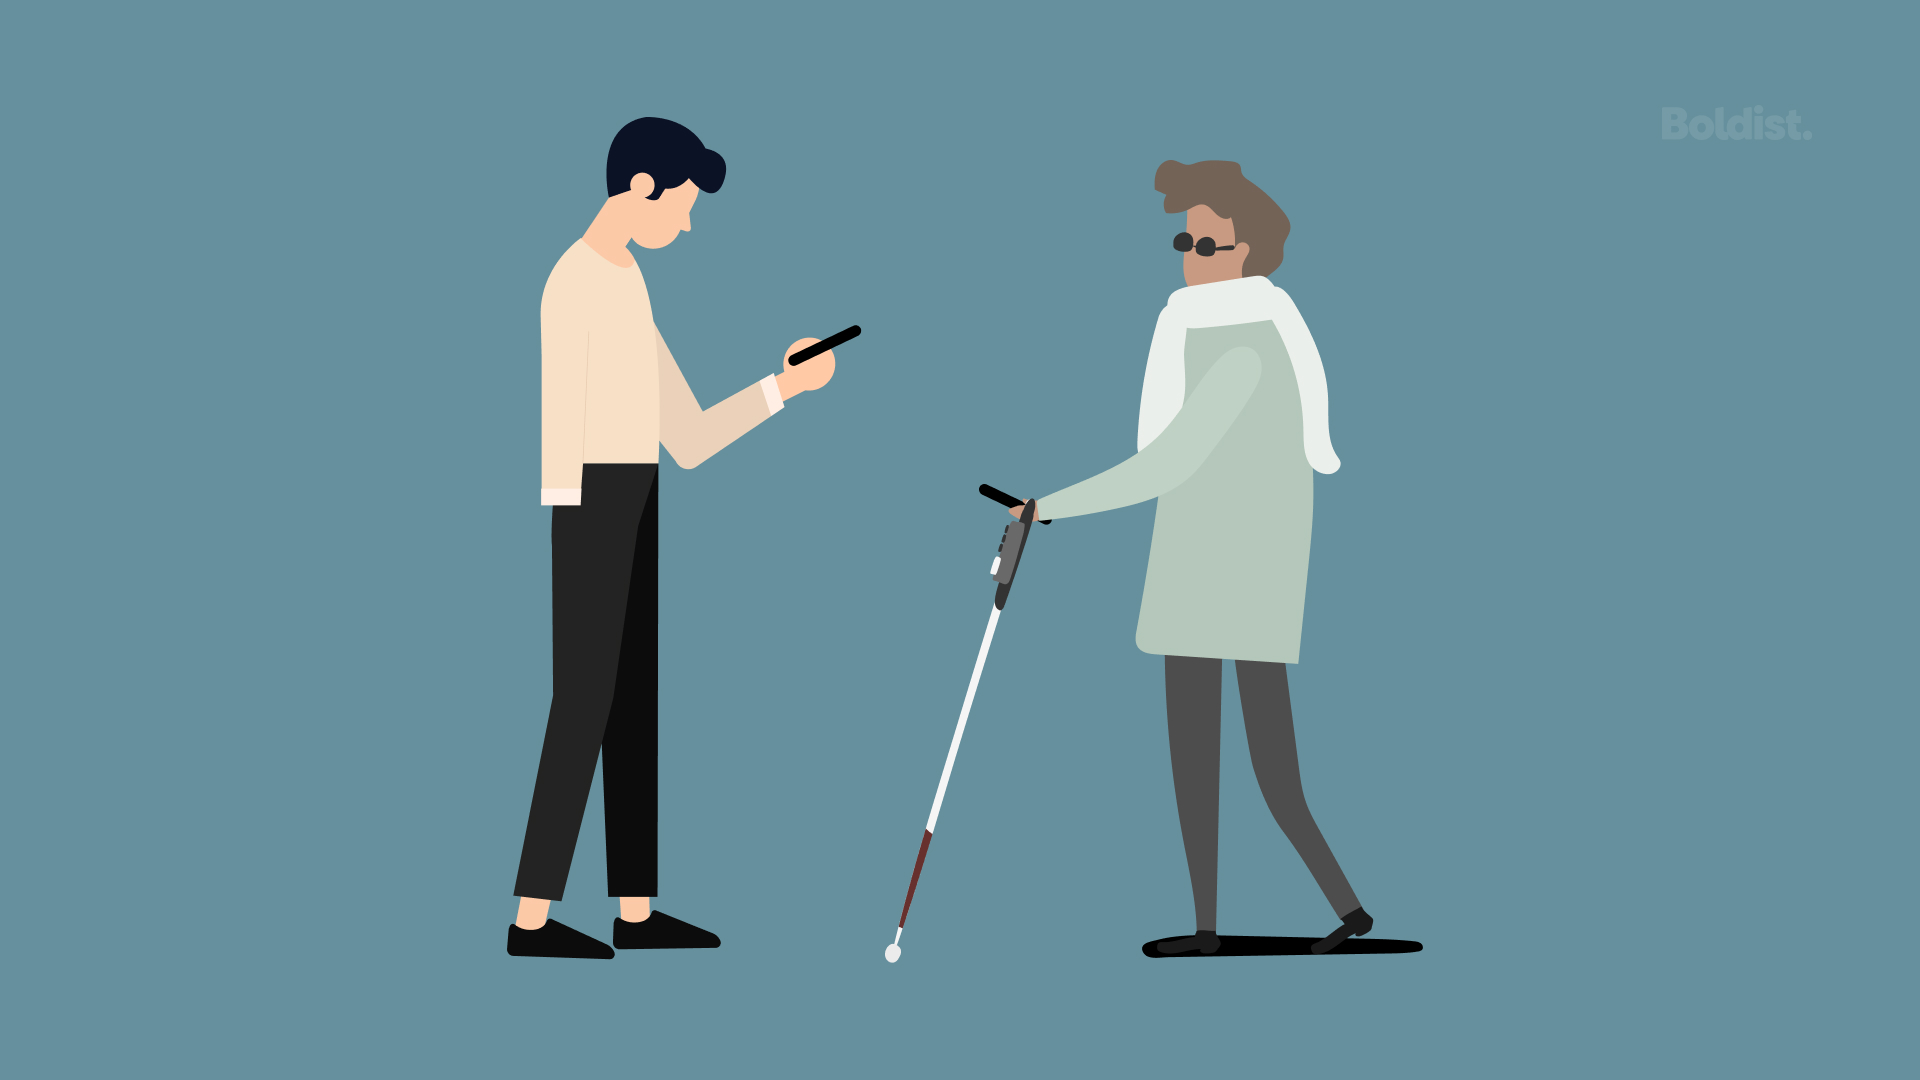 Person with a limb difference and person who is visually impaired